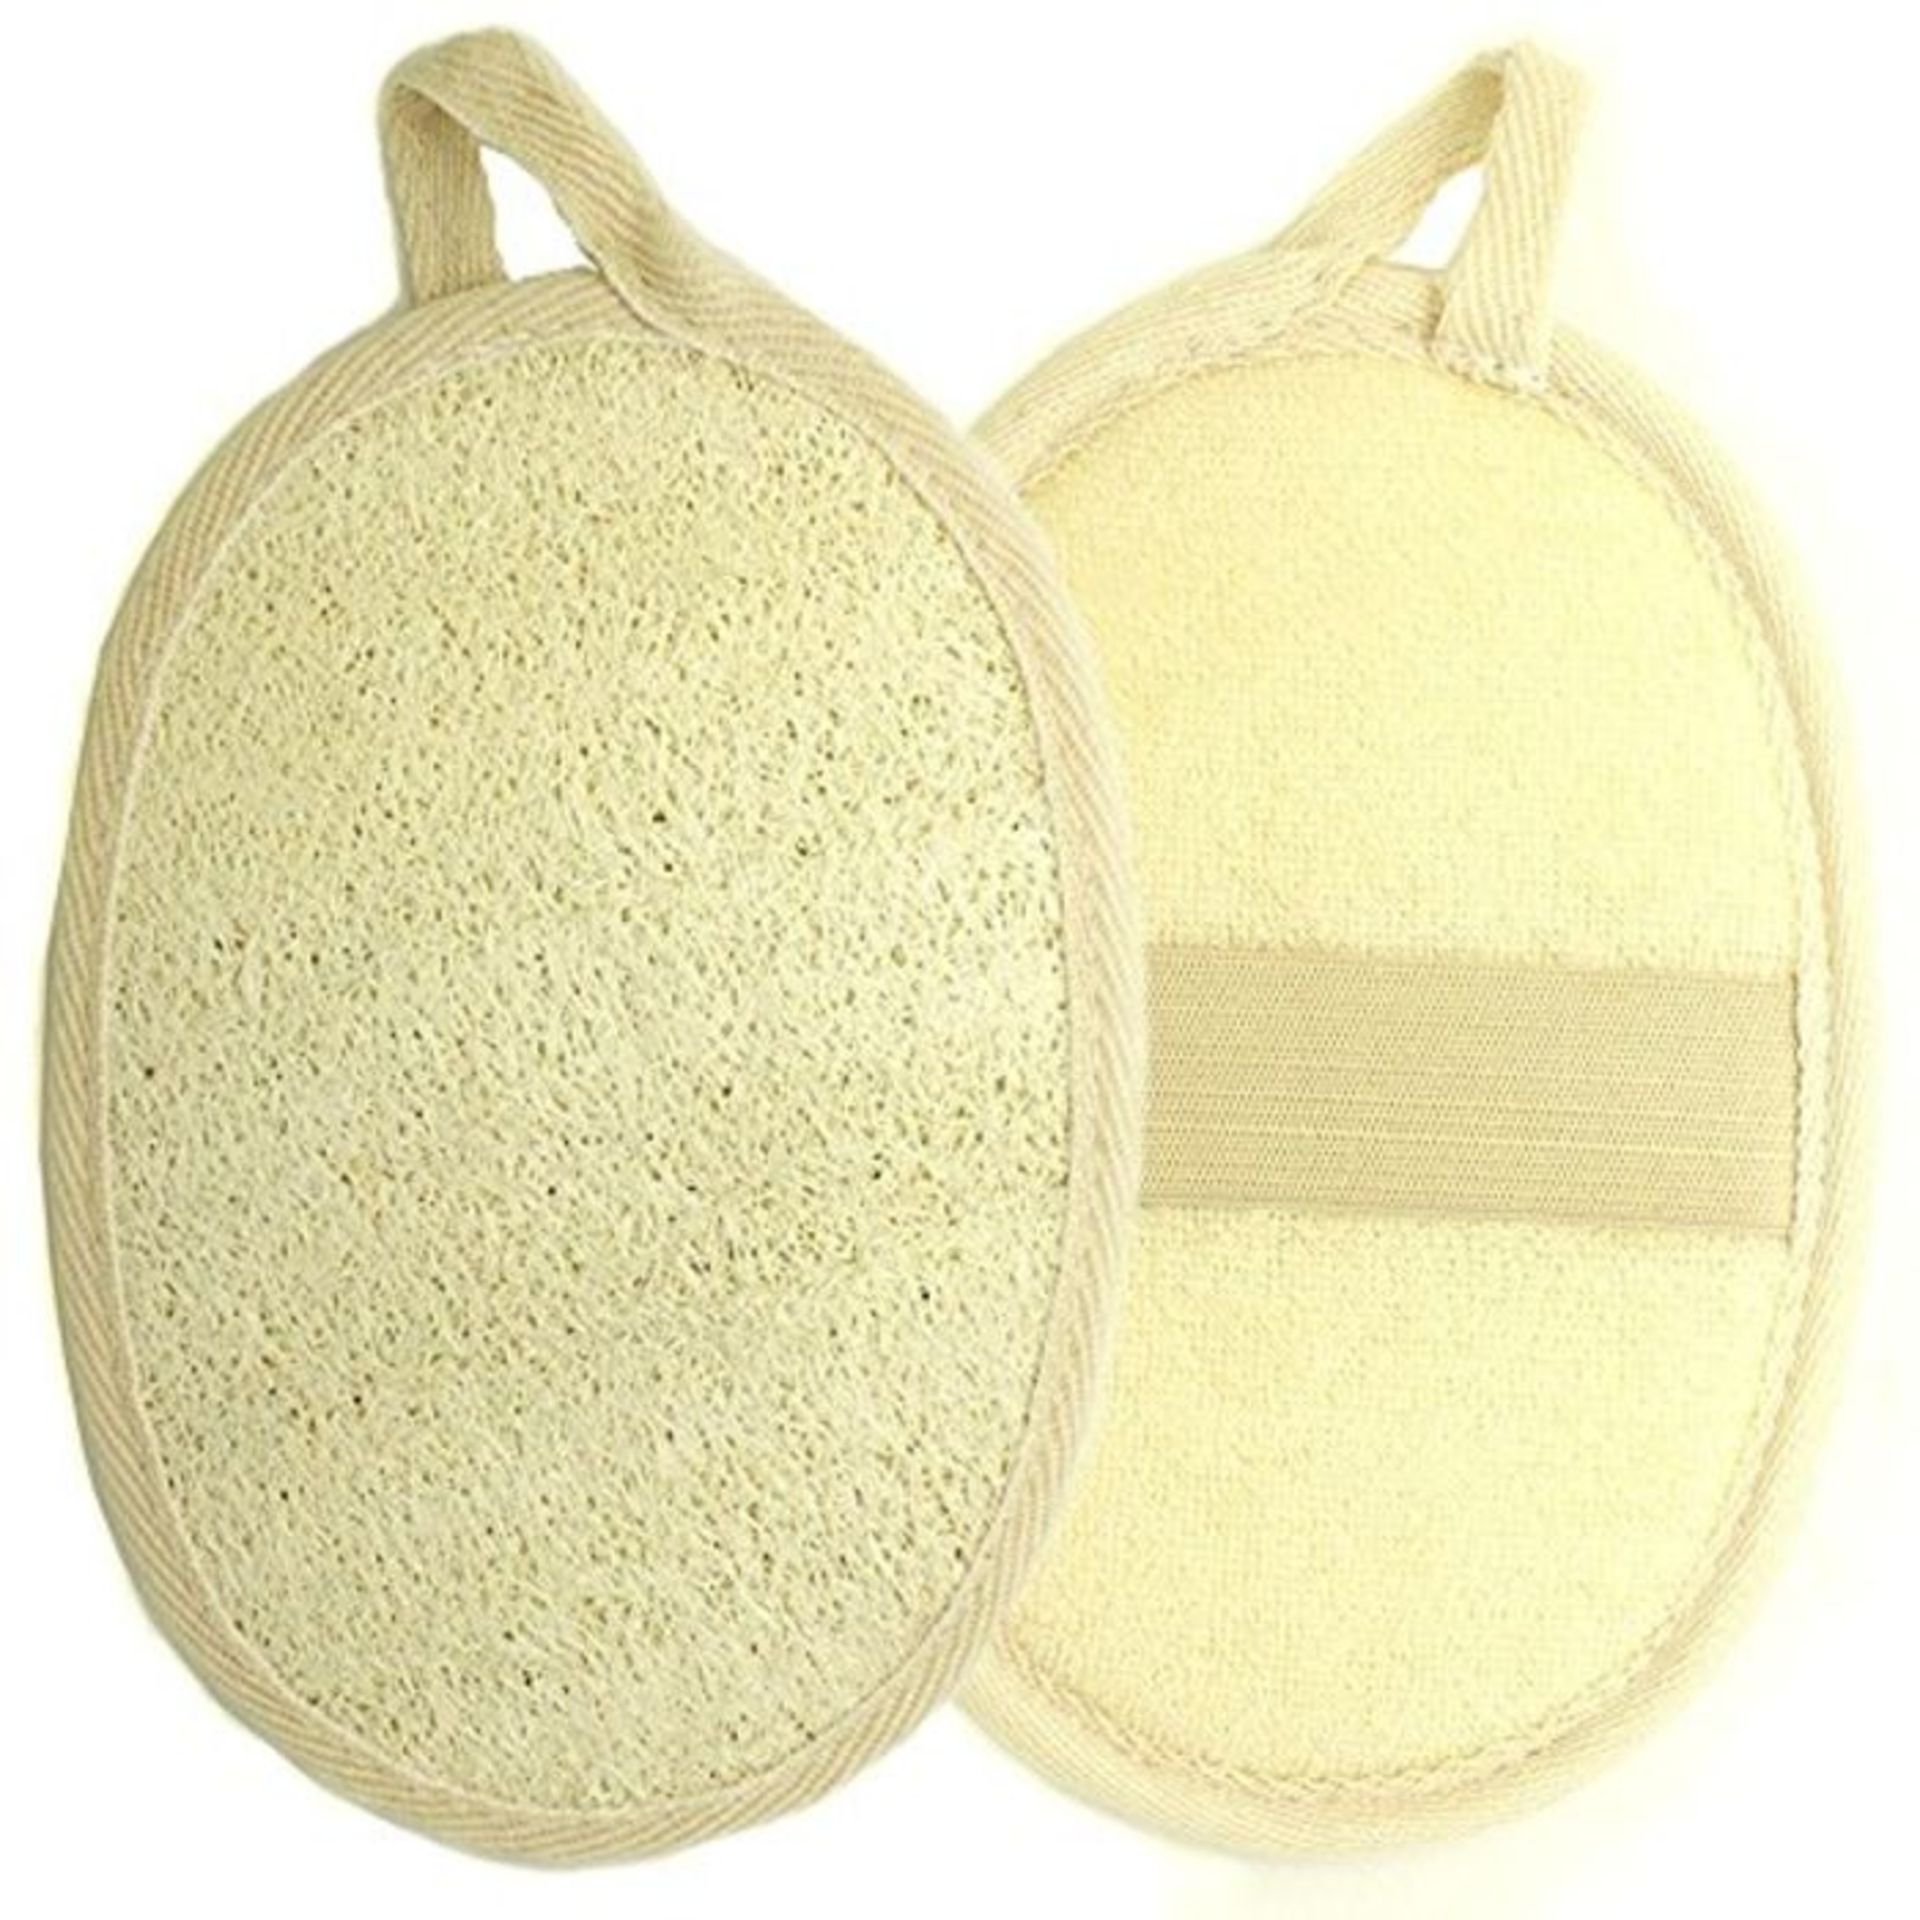 Kiloline Exfoliating Loofah Pads-2 Pack 100% Natural Luffa and Terry Cloth Materials L